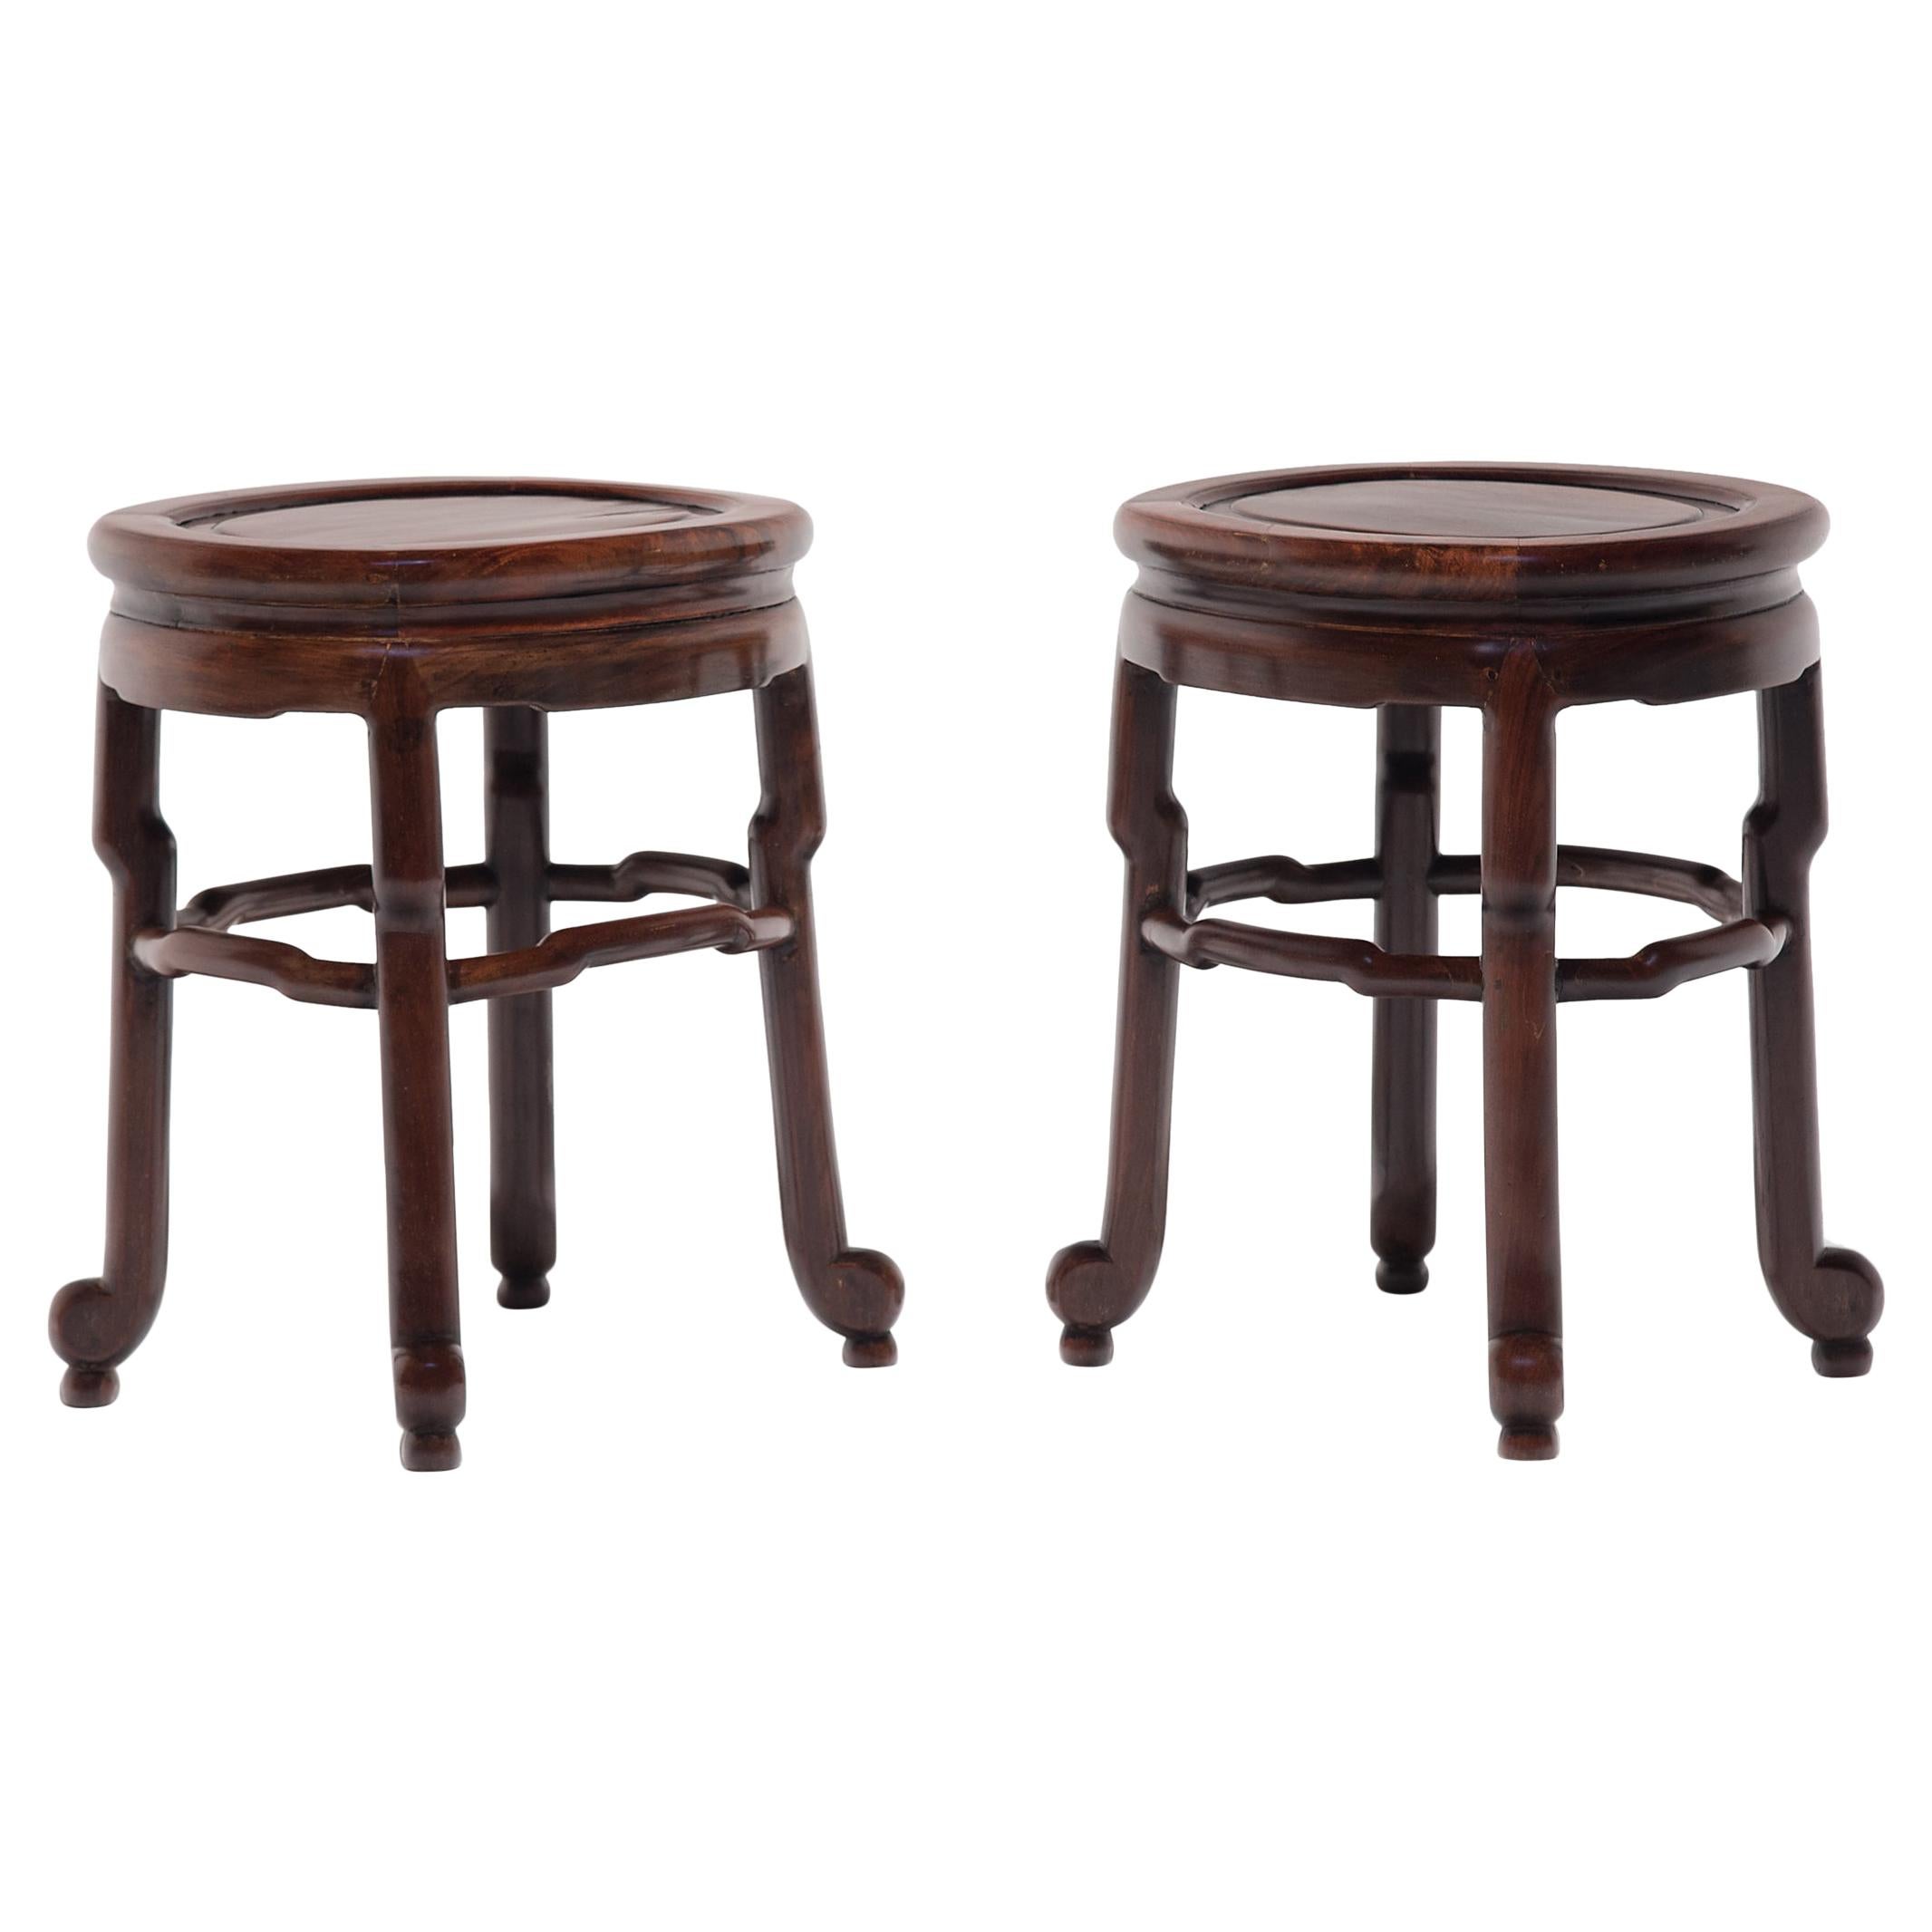 Pair of Chinese Art Deco Oval Stools, c. 1900